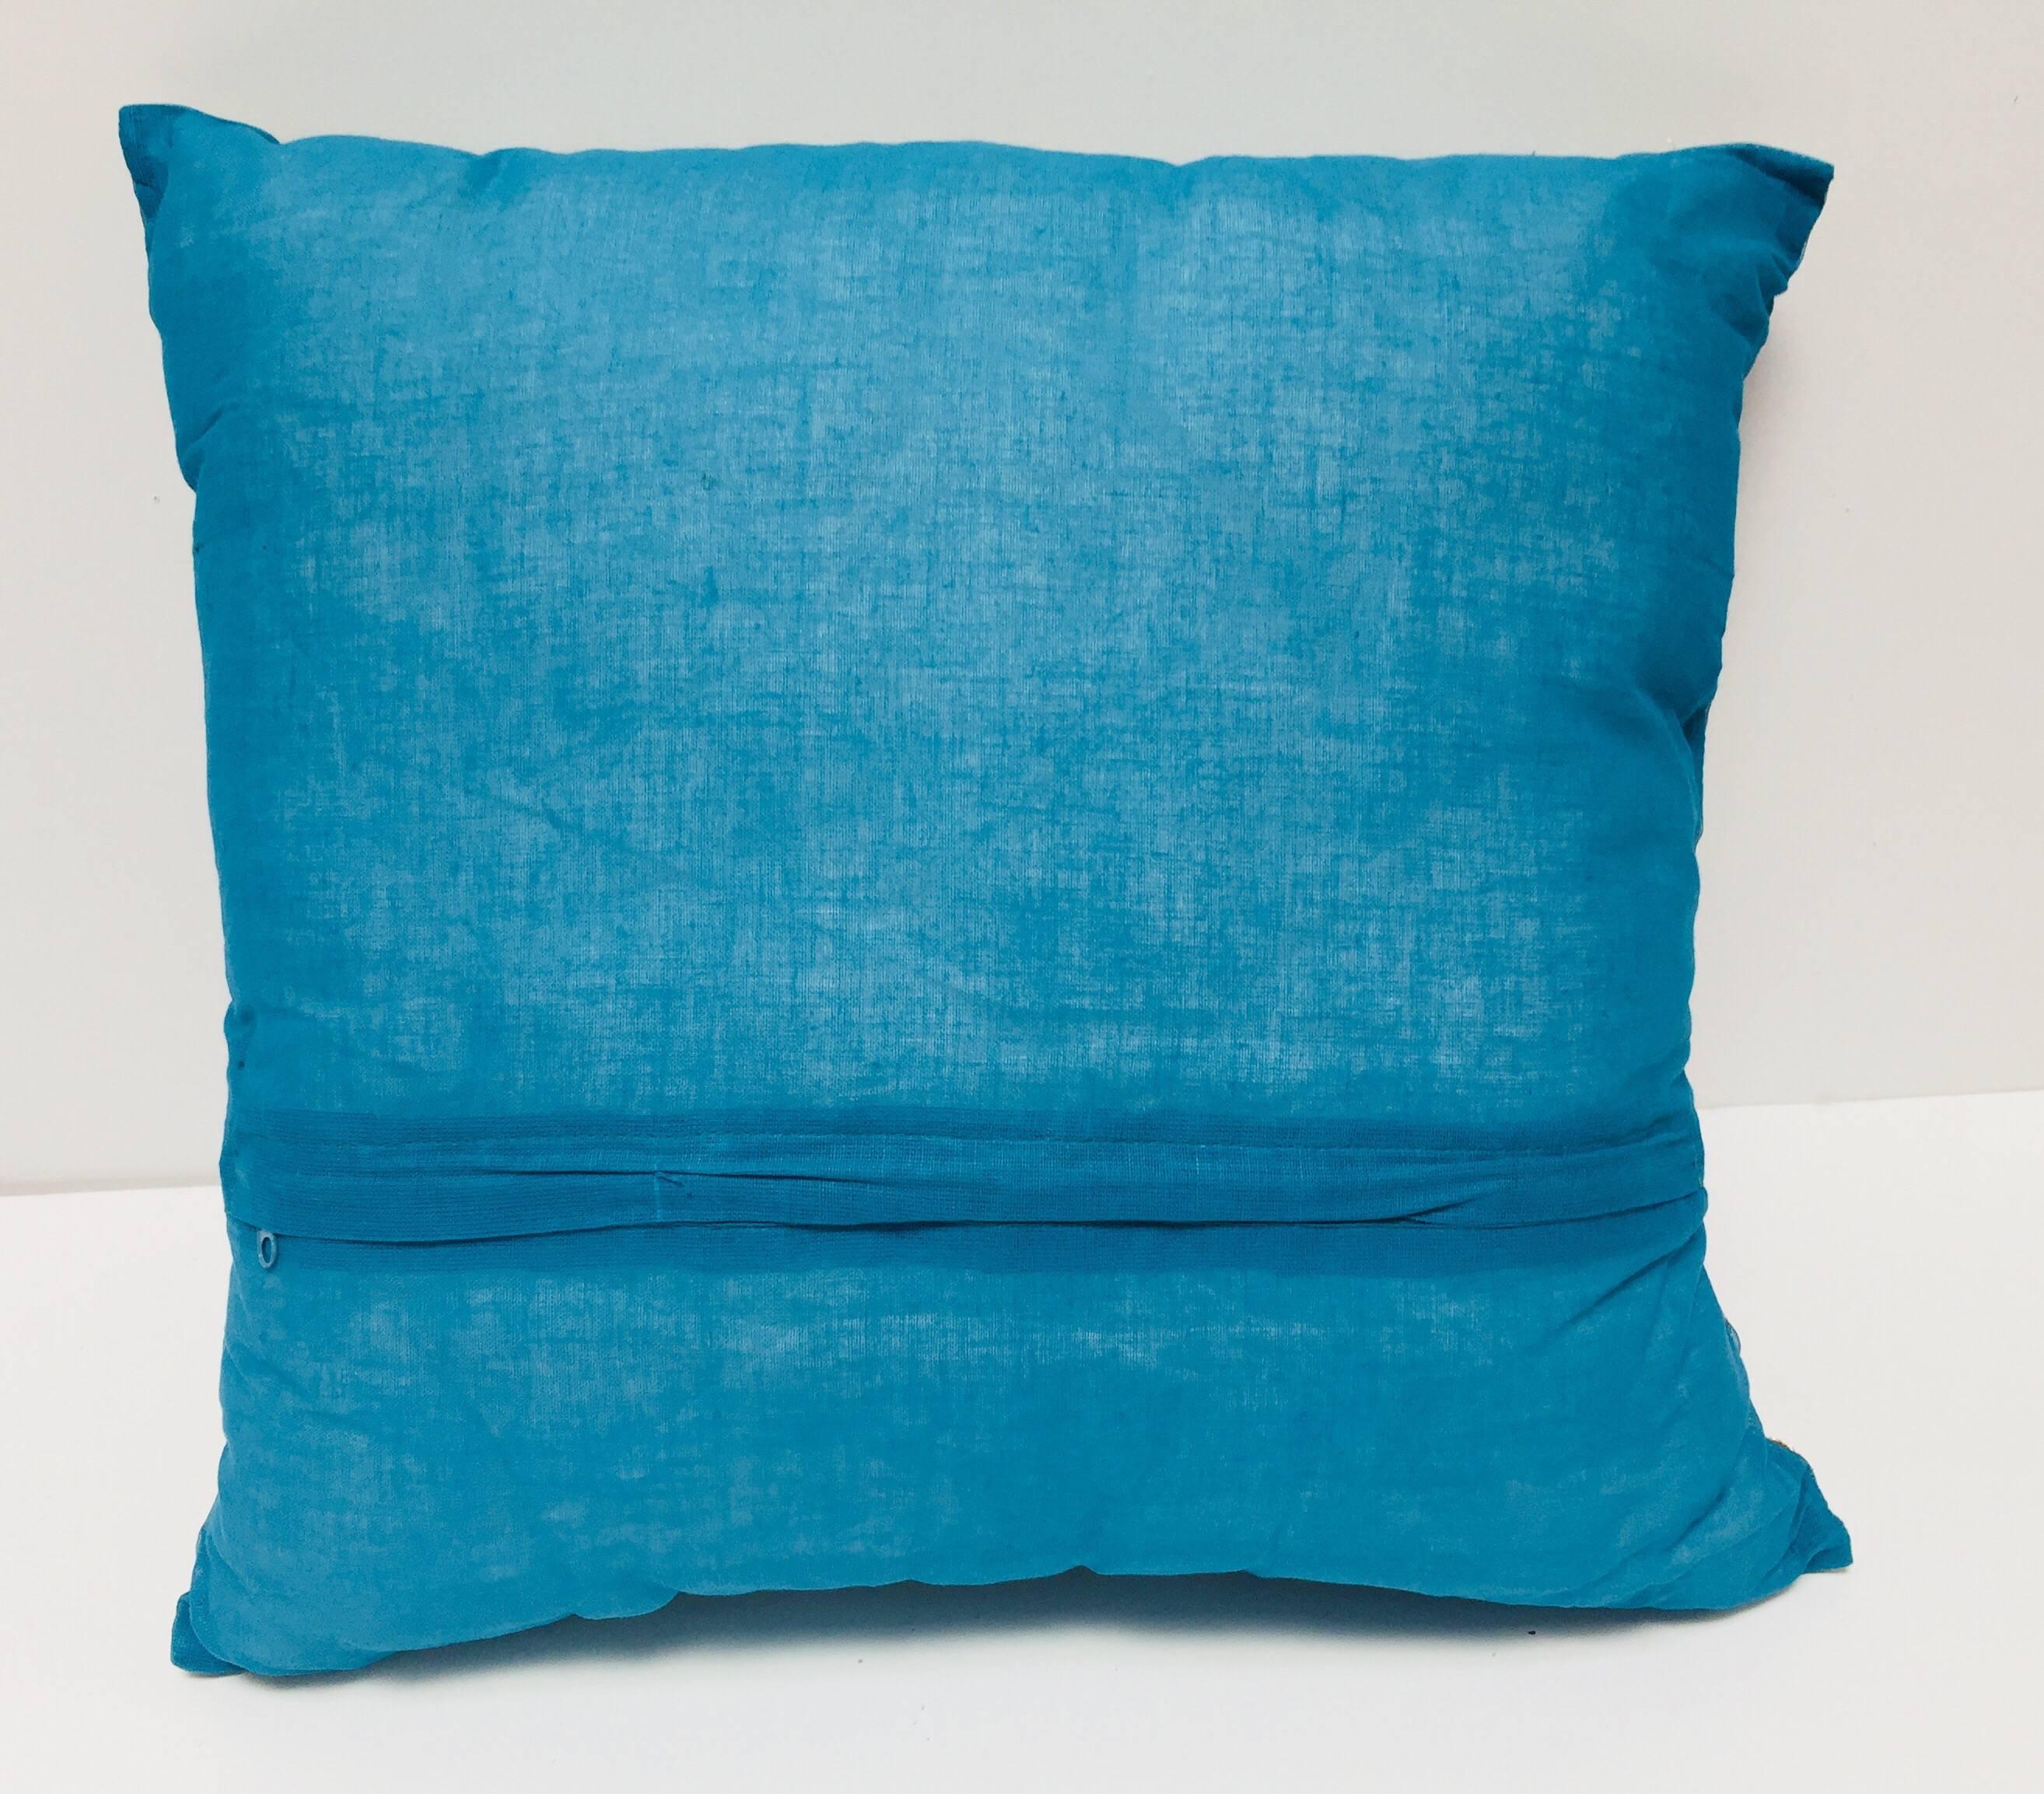 Throw Decorative Turquoise Moorish Pillow Embellished with Sequins and Beads For Sale 3